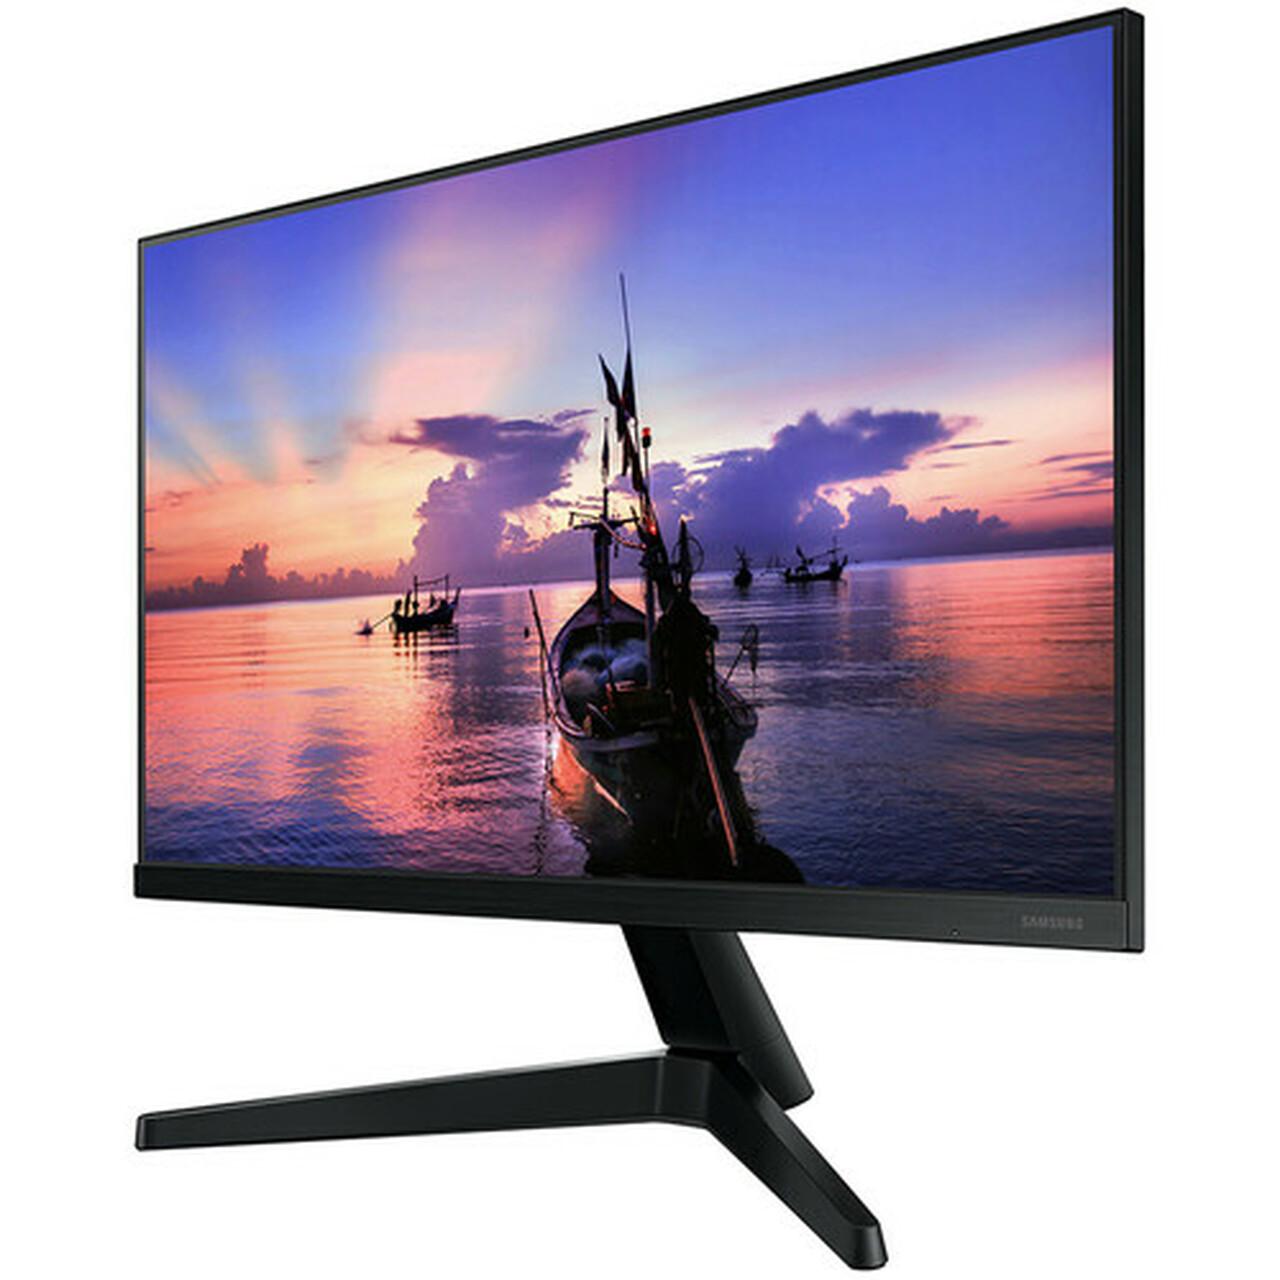 Samsung LF24T350FHNXZA 24in IPS Monitor for $109.99 Shipped